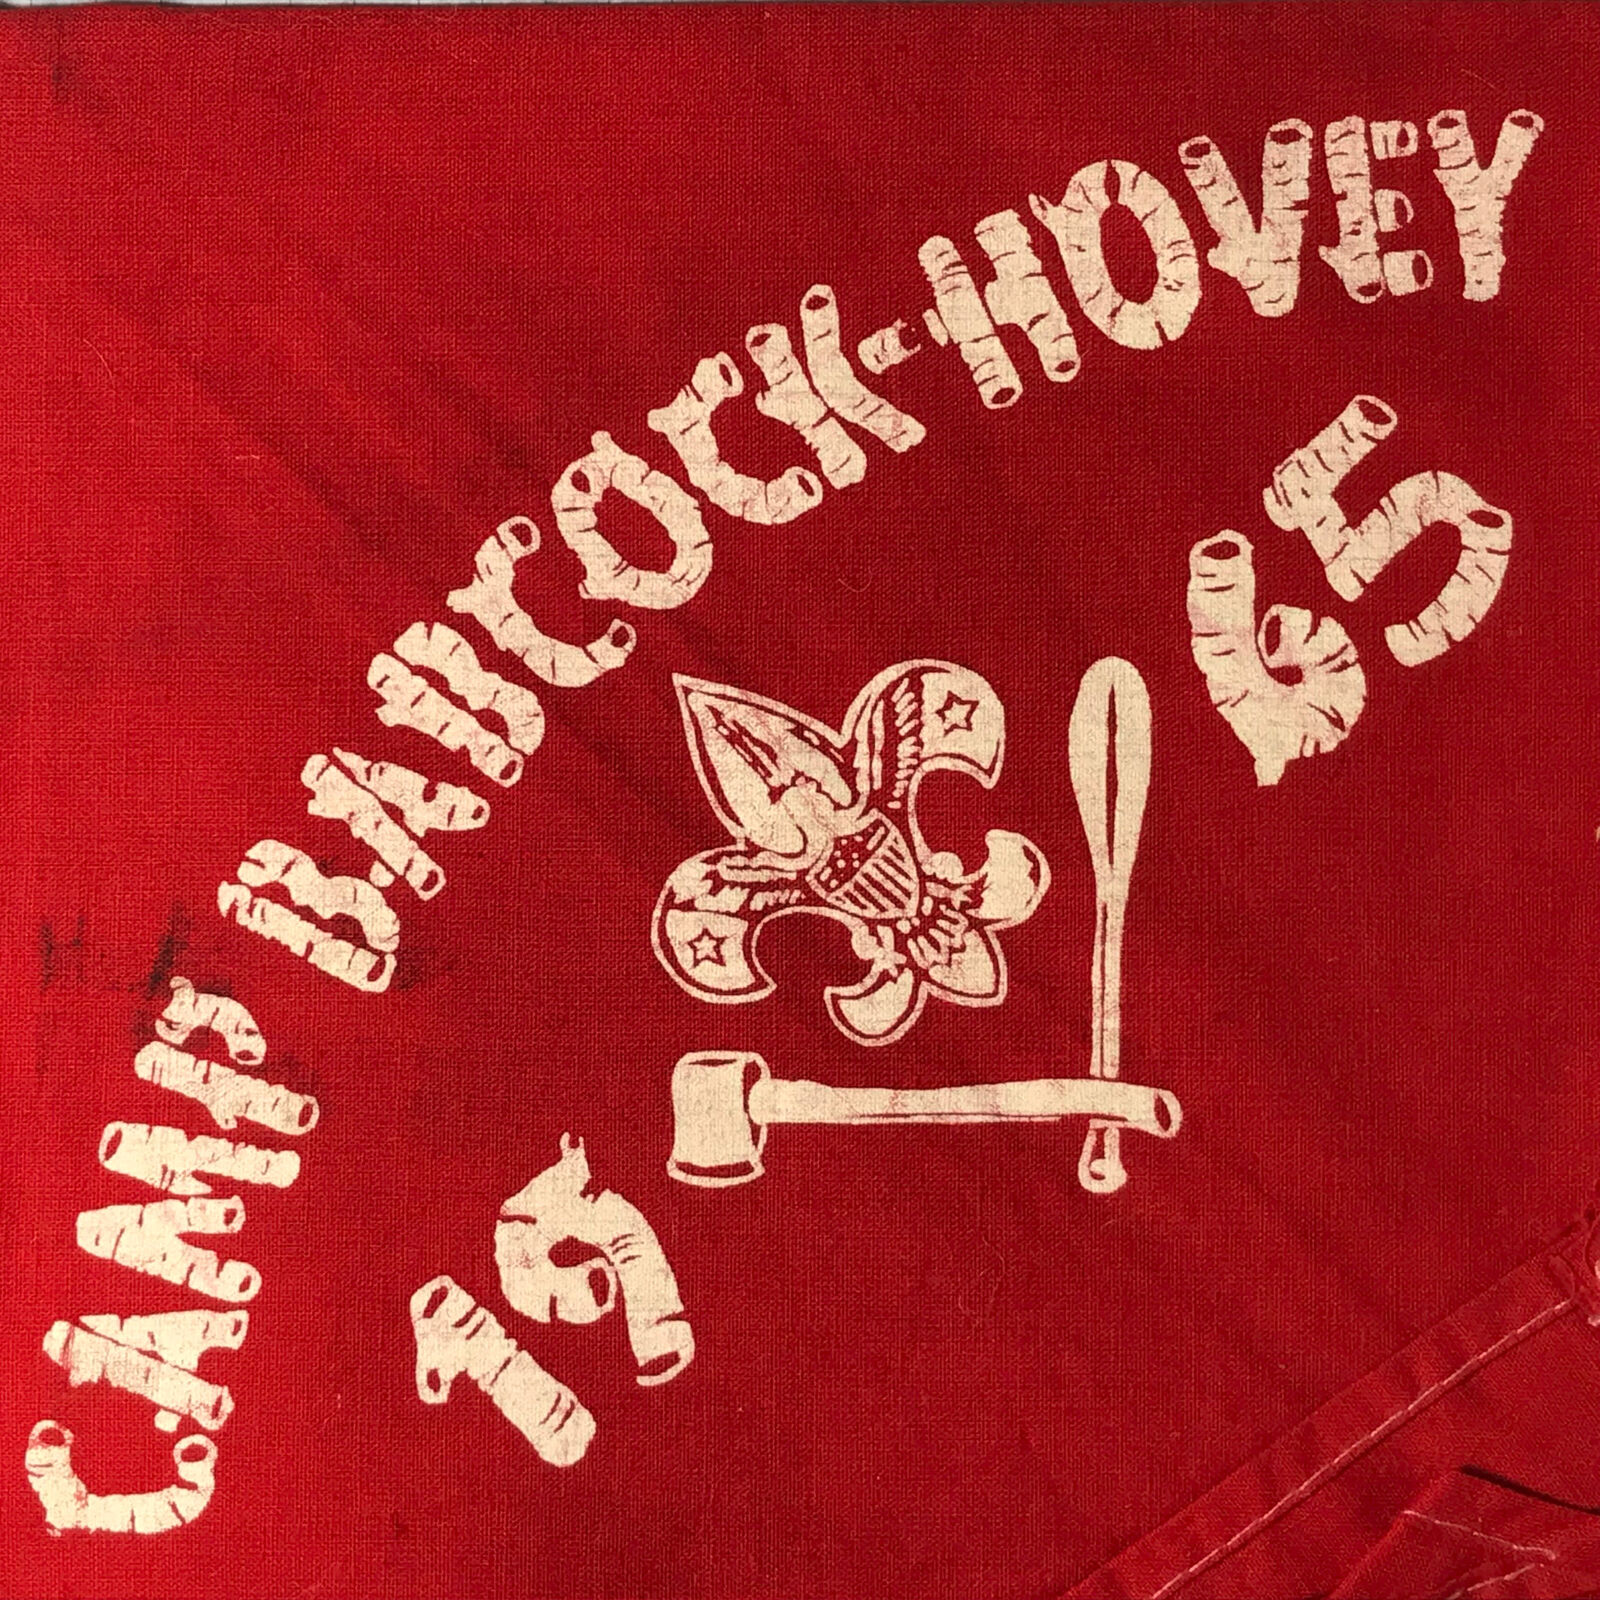 Camp Babcock-Hovey 1965 Red Neckerchief Finger Lakes Council NY USED Bdr (LB413)